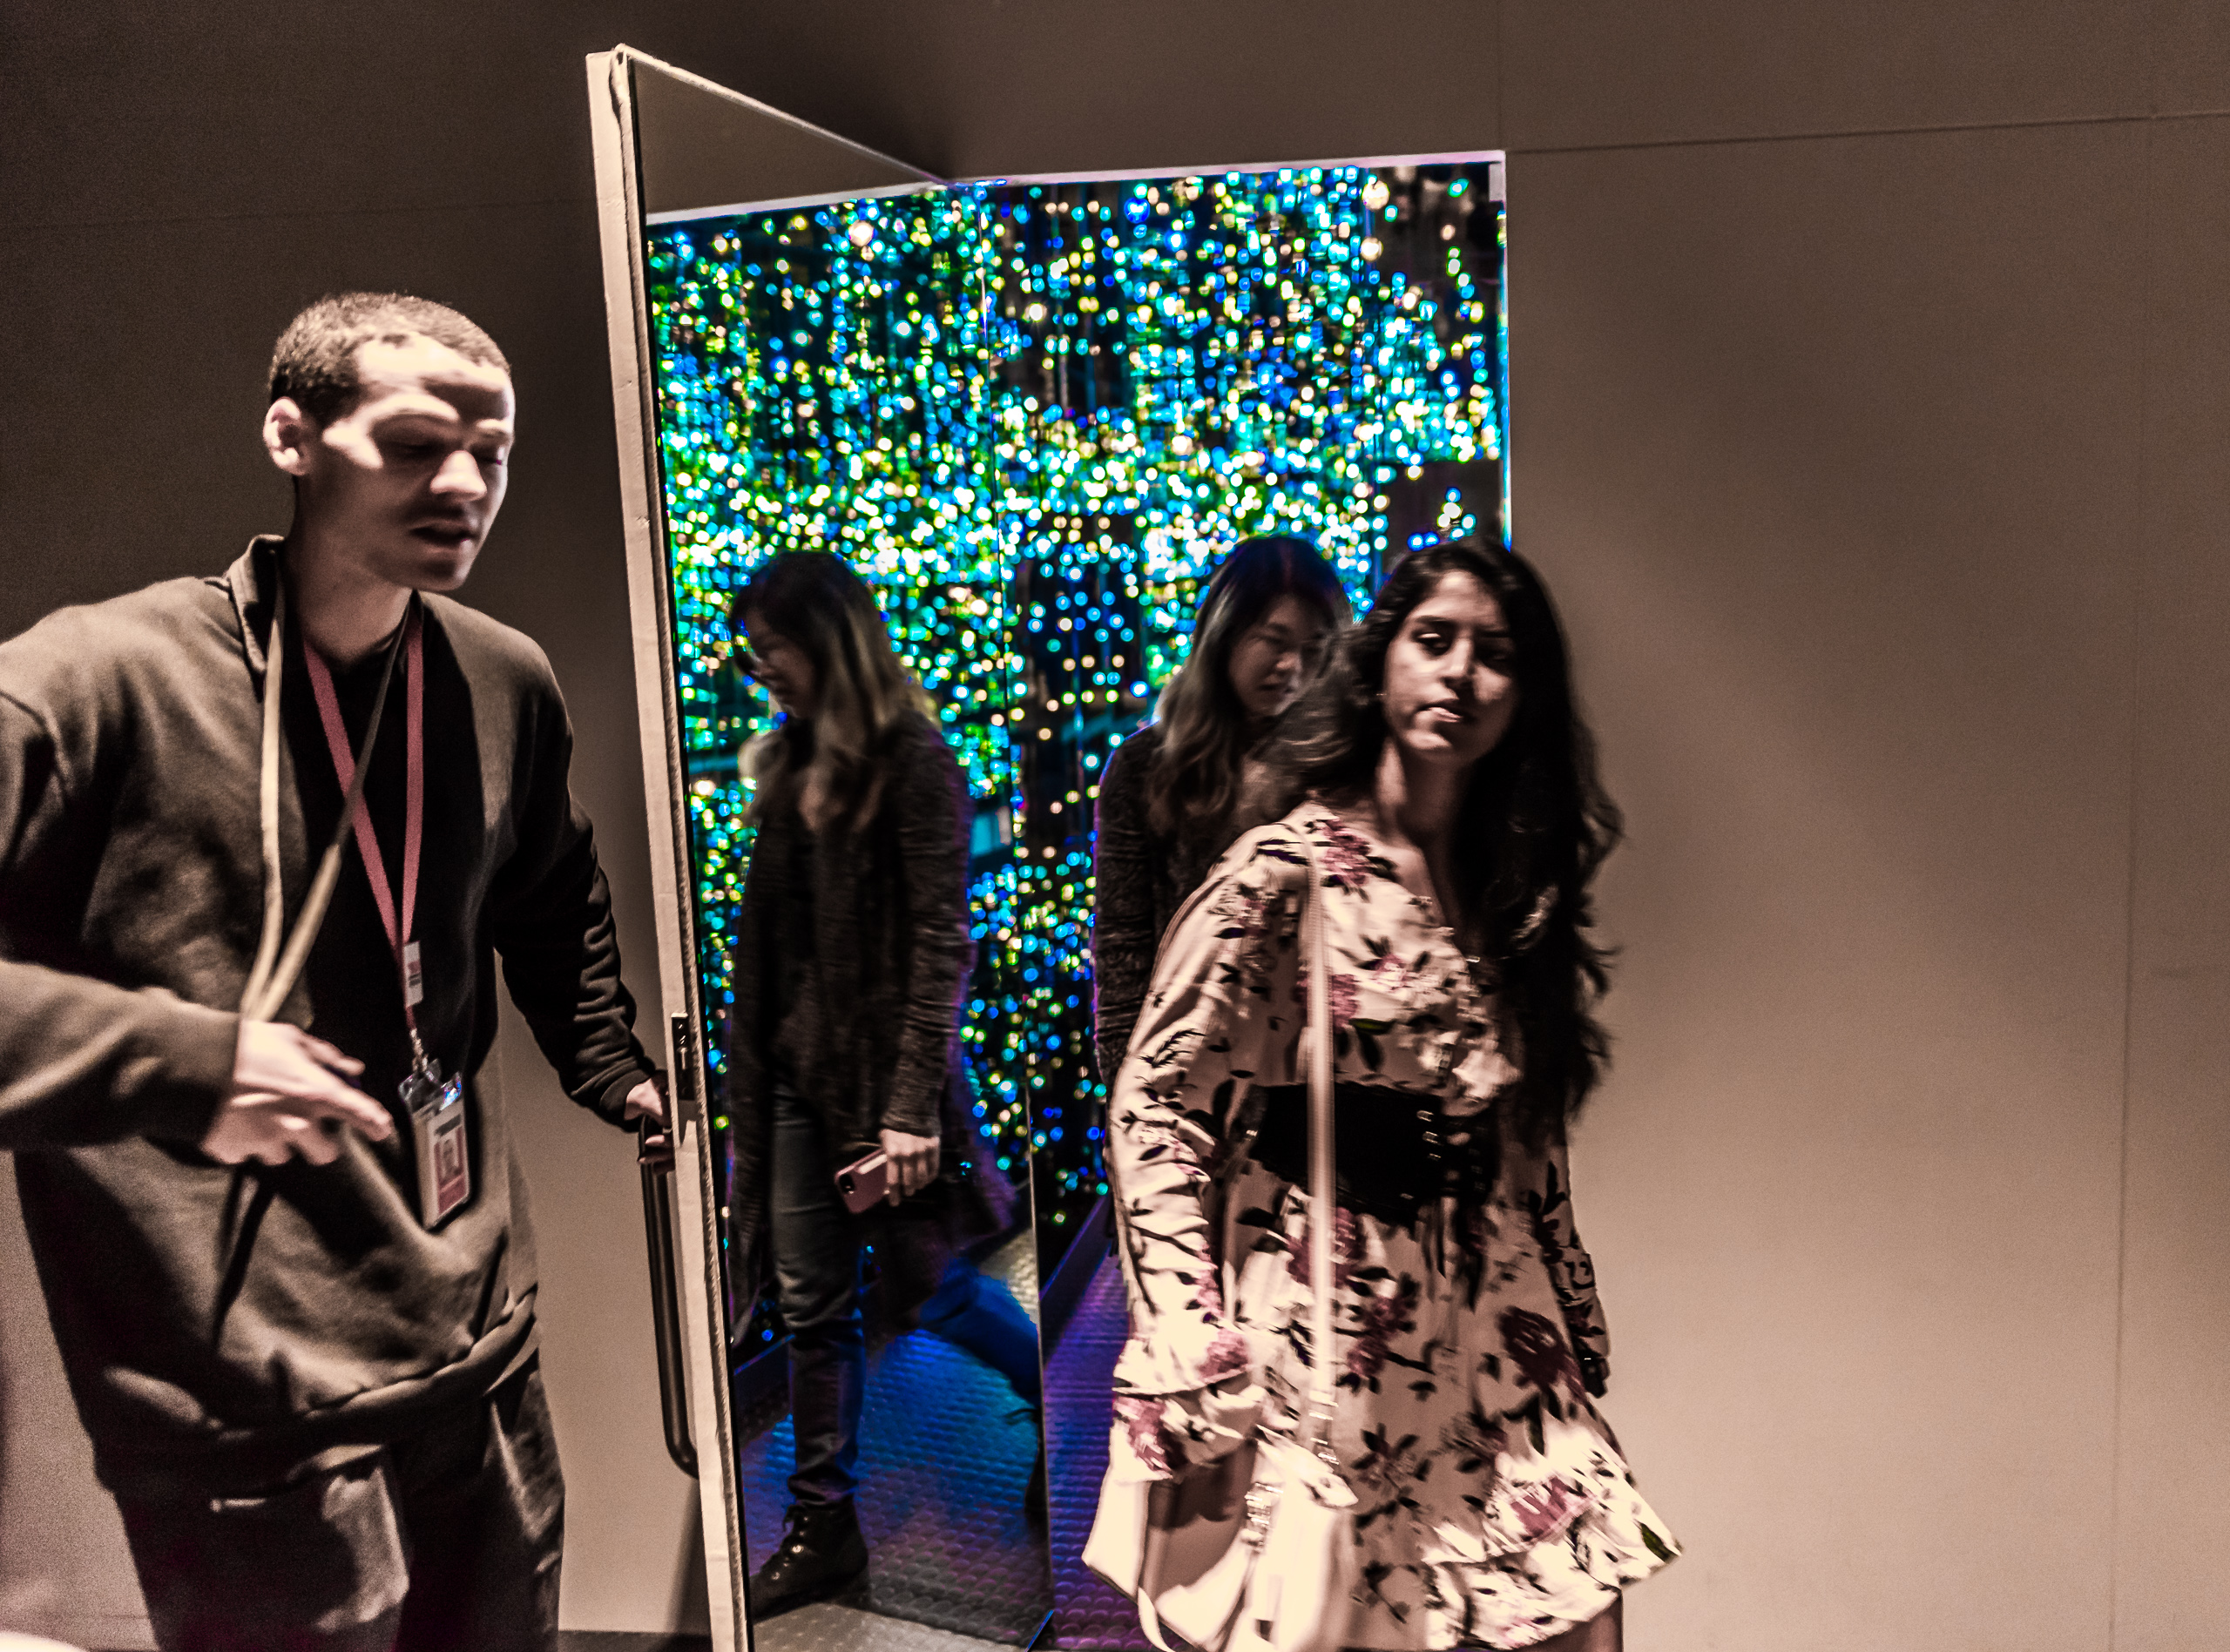 A visitor services associate holds a door open for people leaving one of Yayoi Kusama's infinity rooms